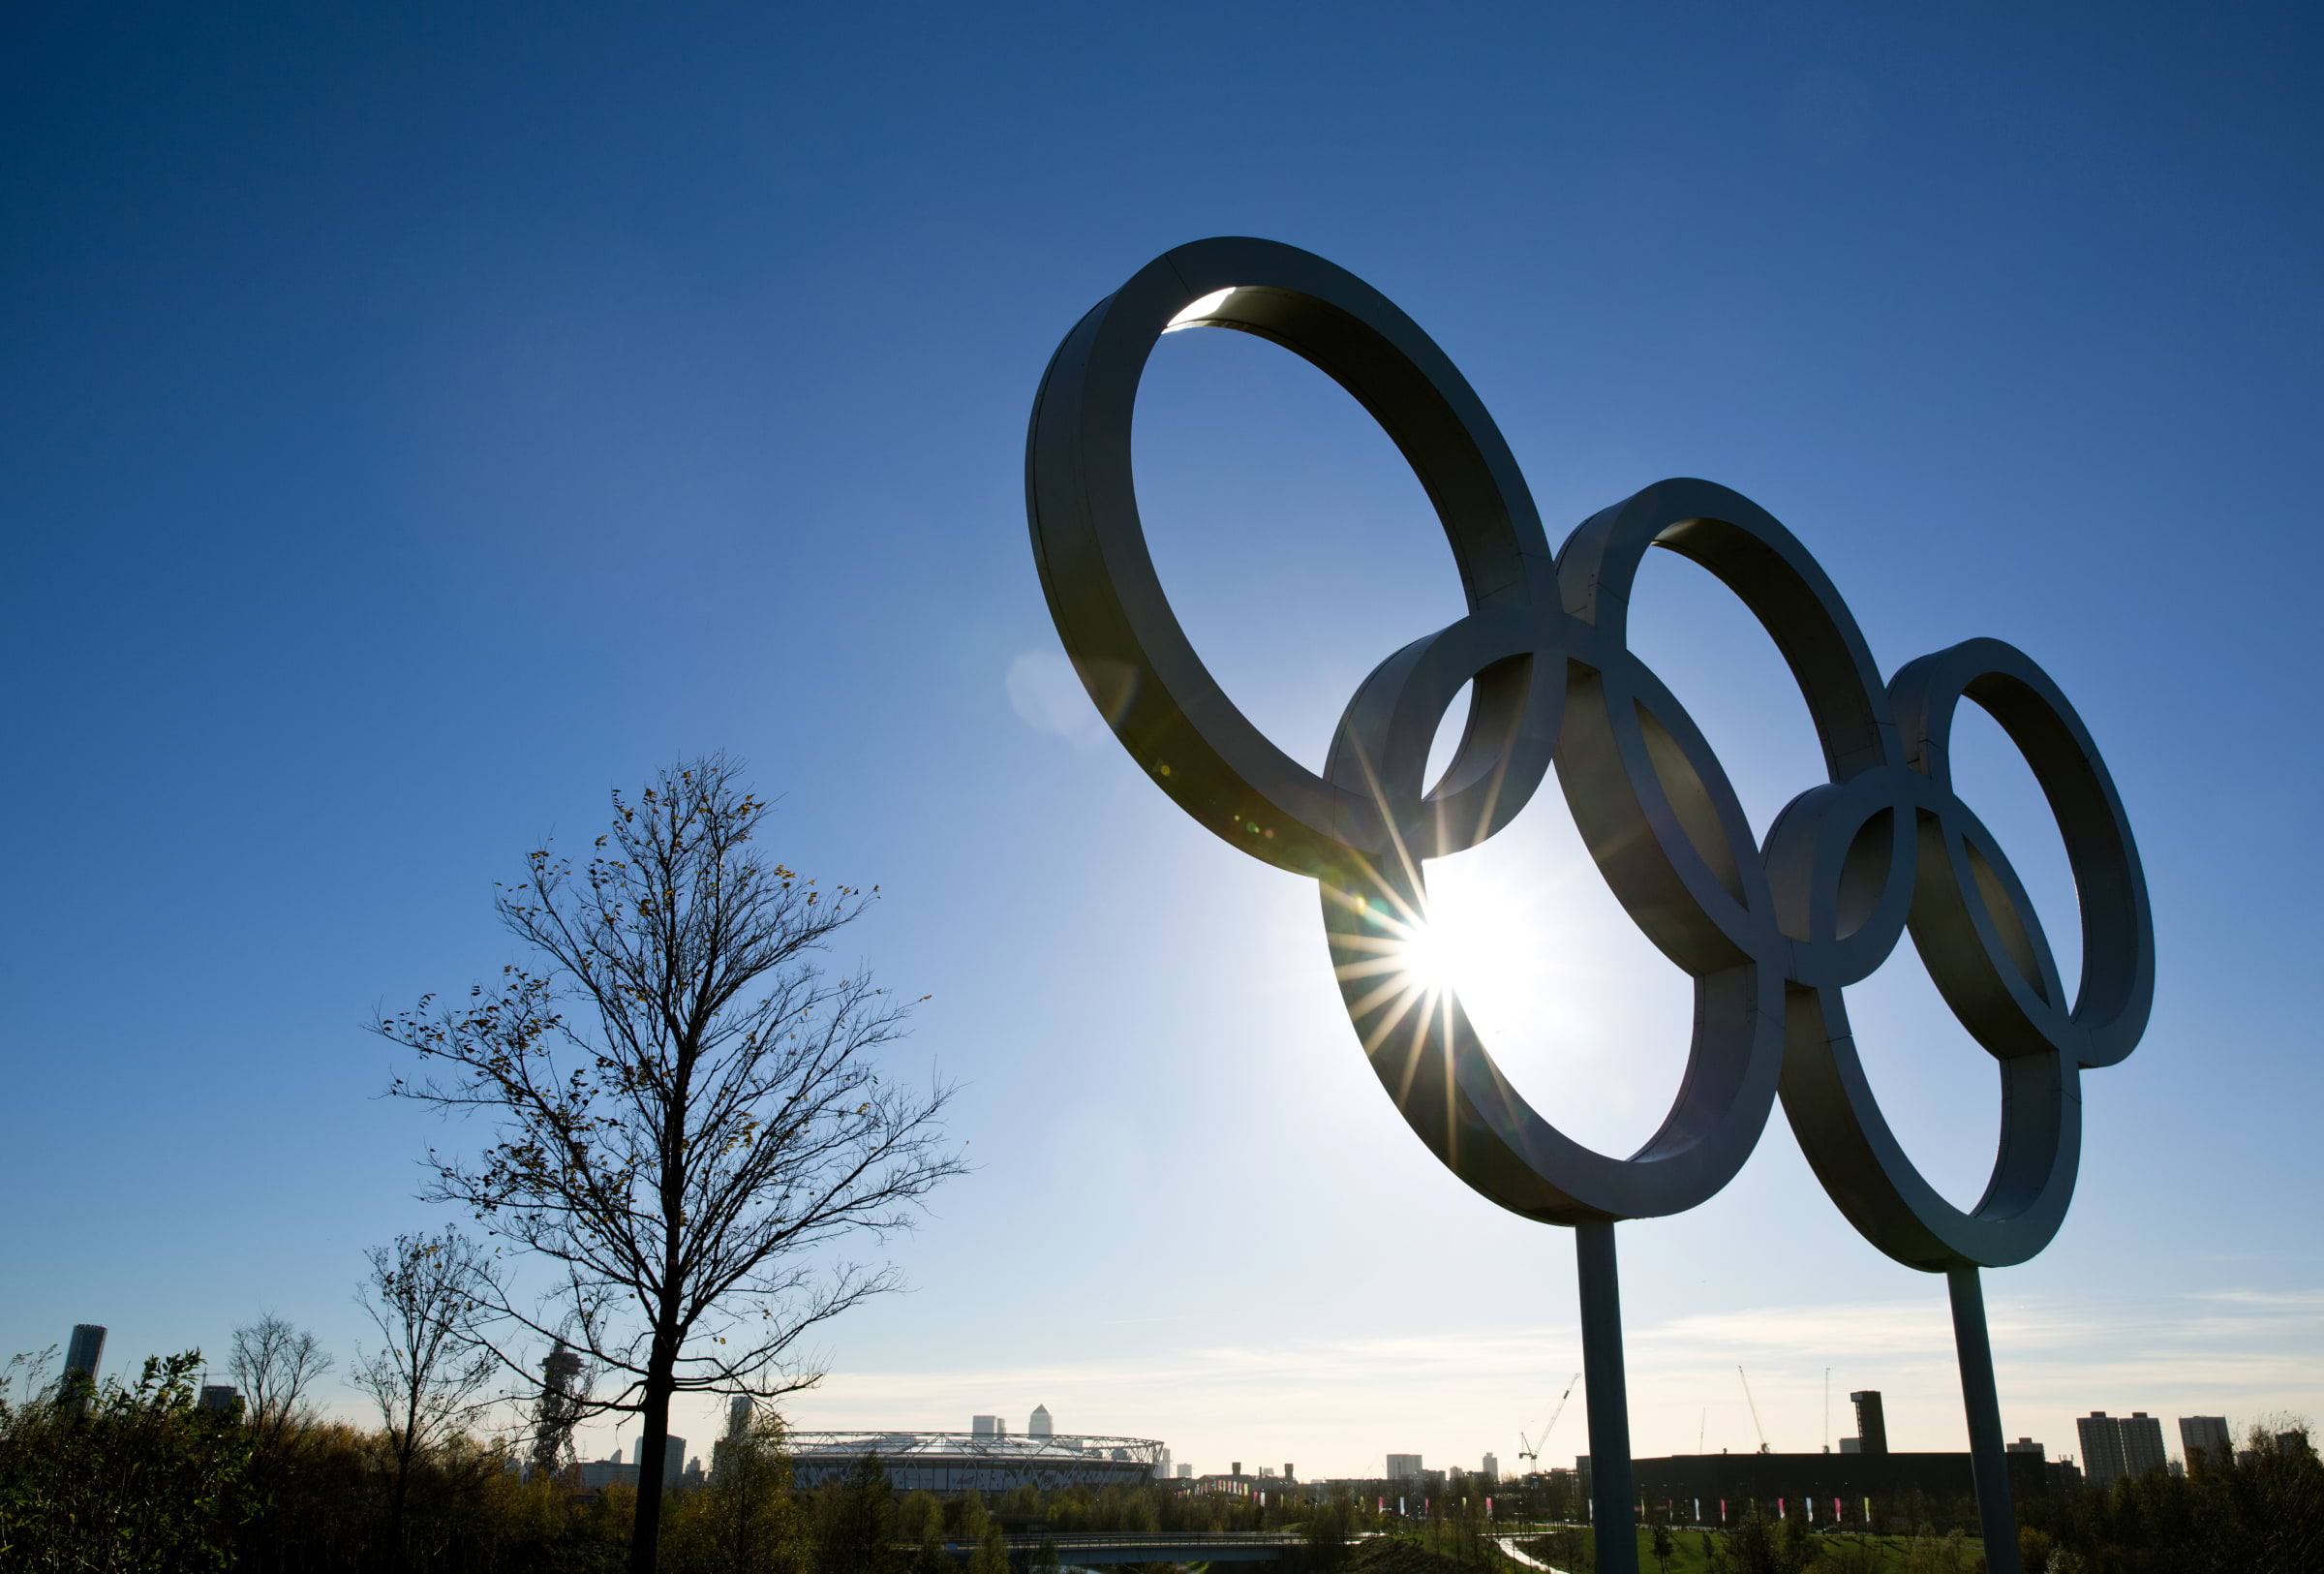 Where to watch the 2024 Summer Olympics in London